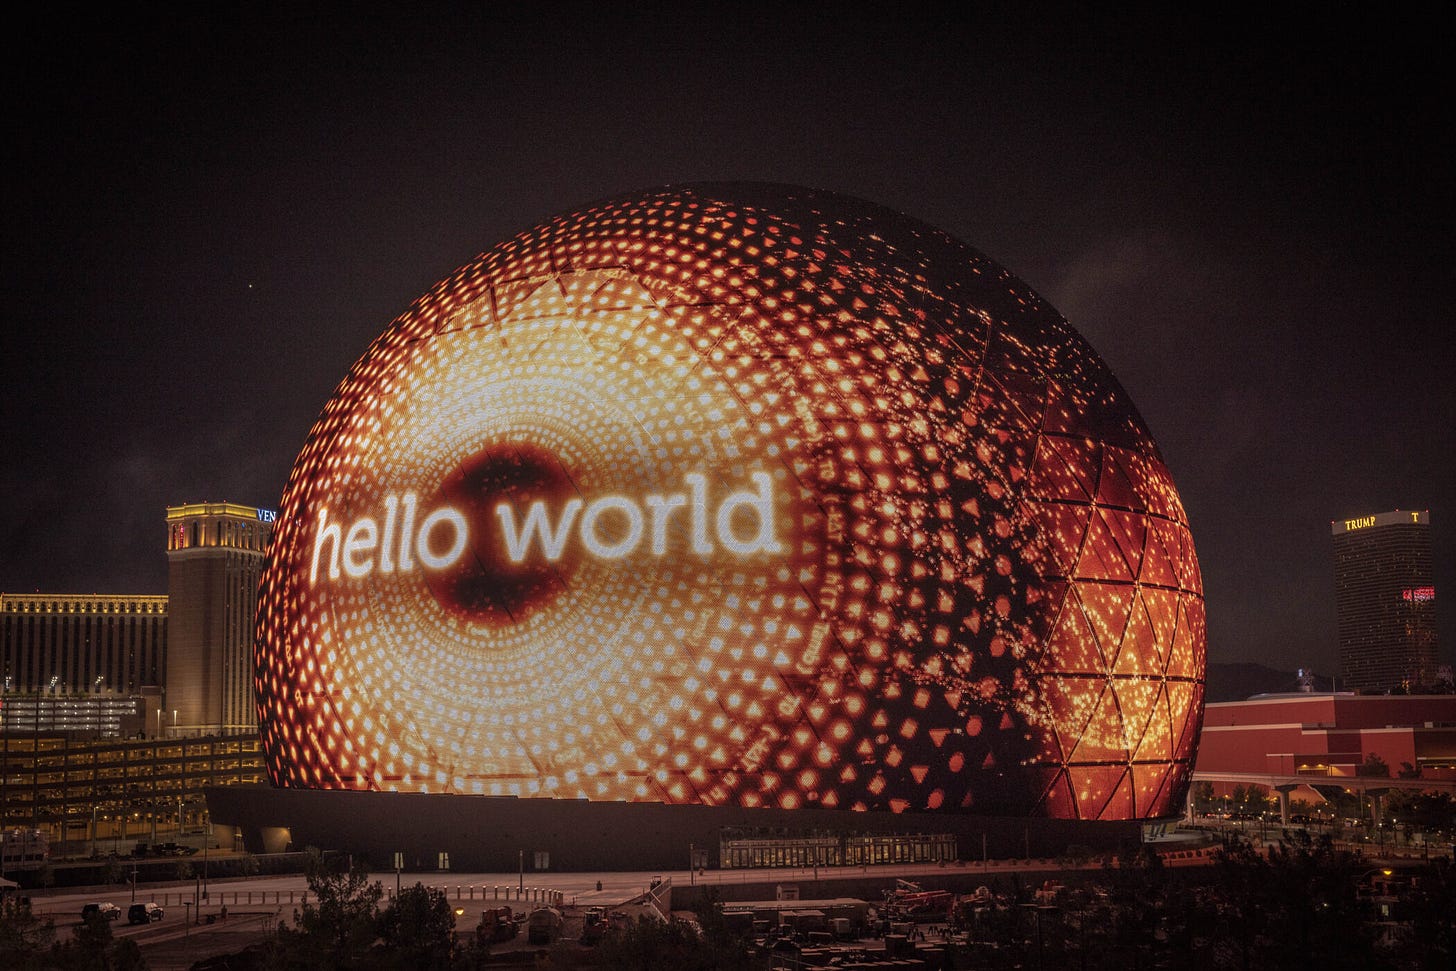 Las Vegas Sphere comes to life with world's largest LED screen